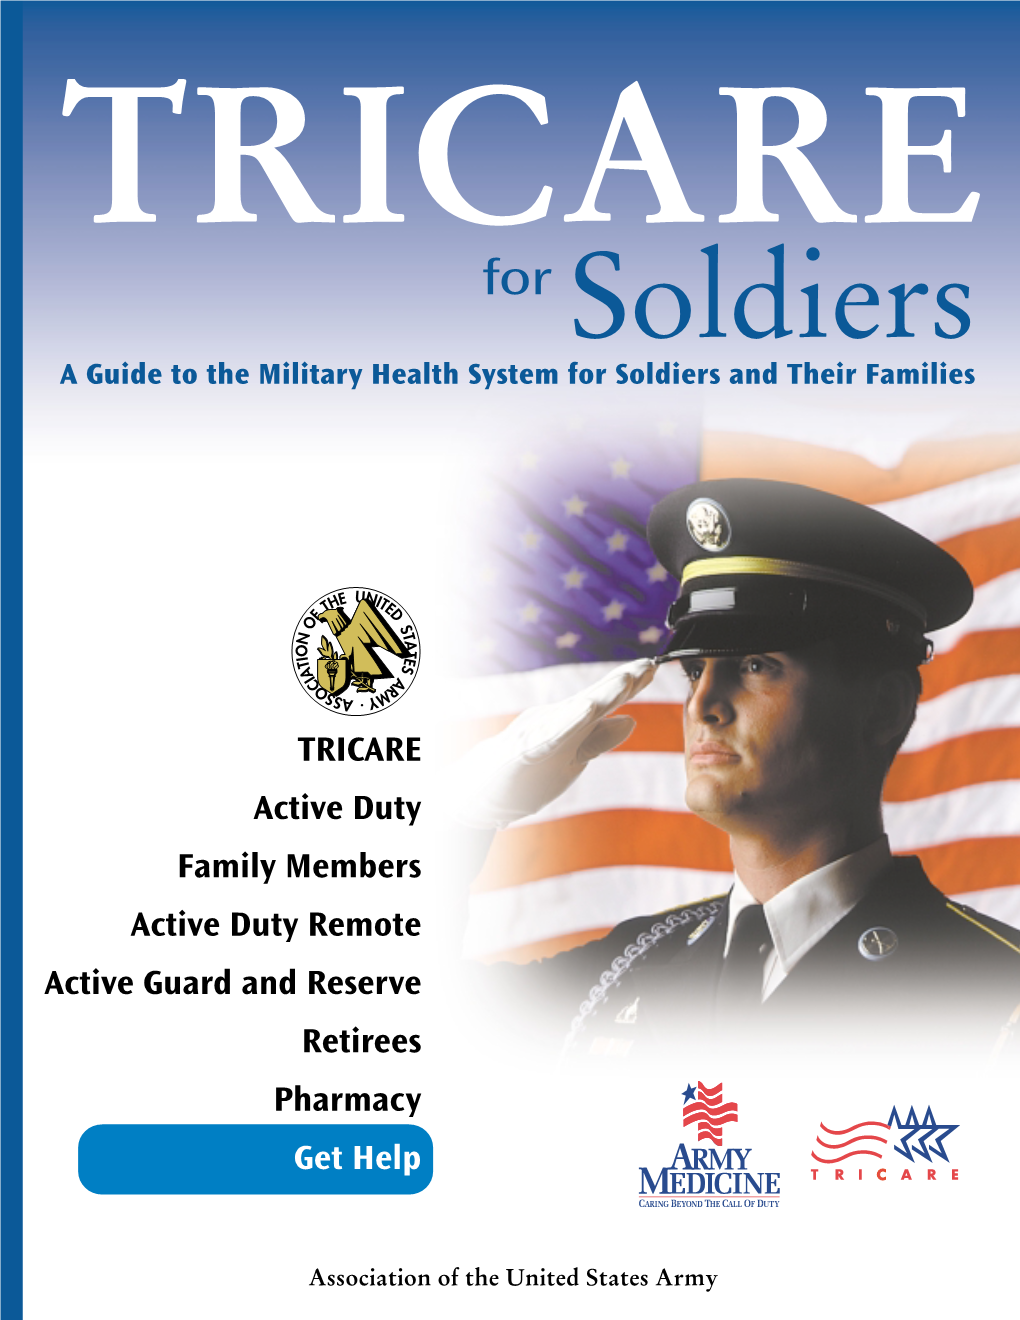 TRICARE for Soldiers a Guide to the Military Health System for Soldiers and Their Families